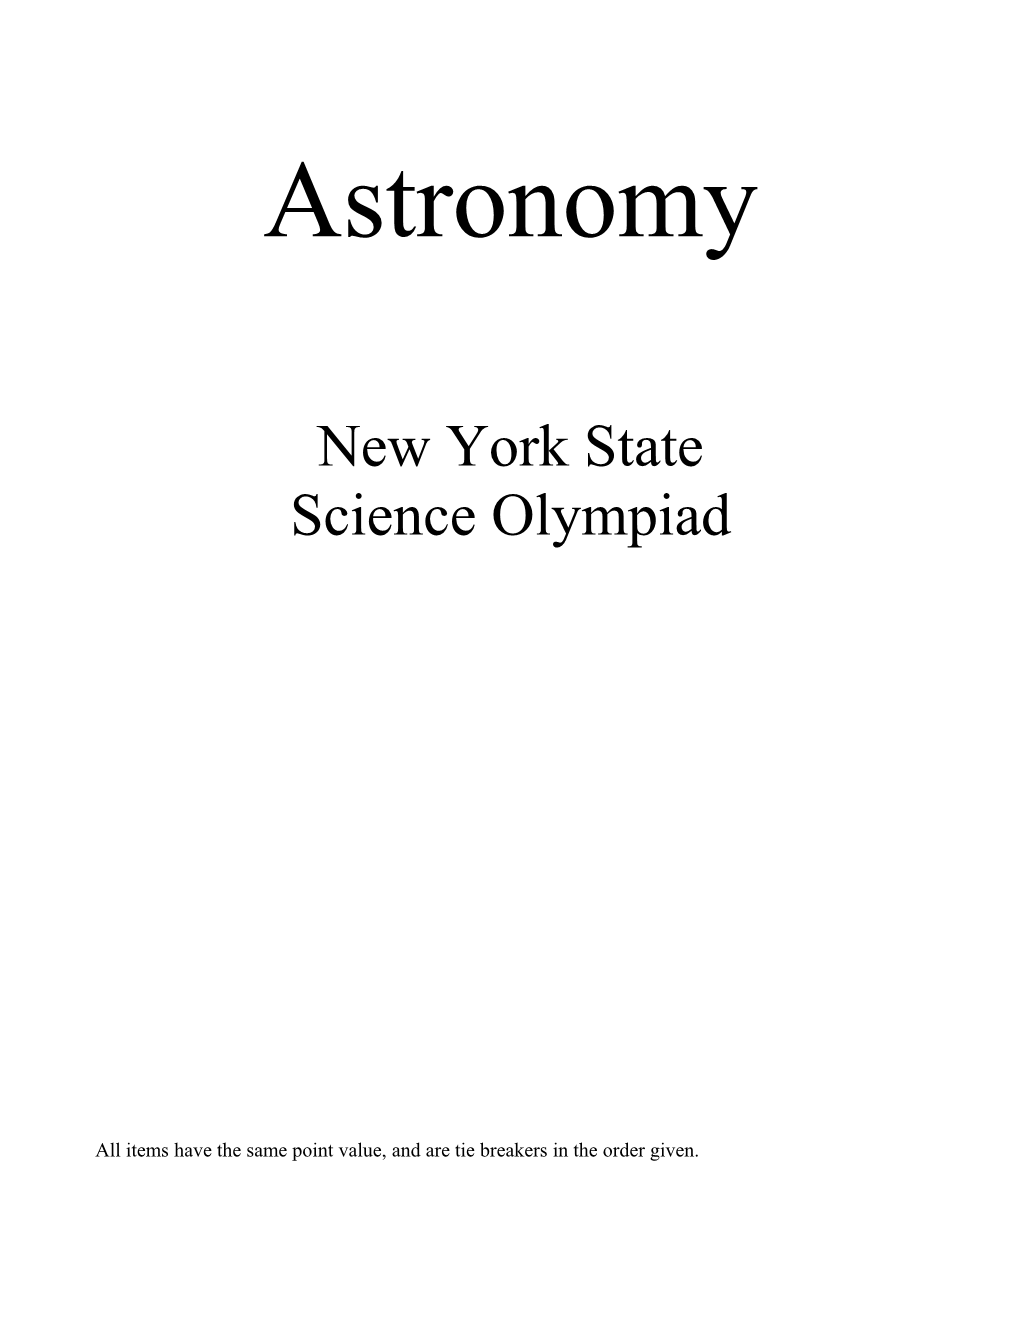 New York State Science Olympiad